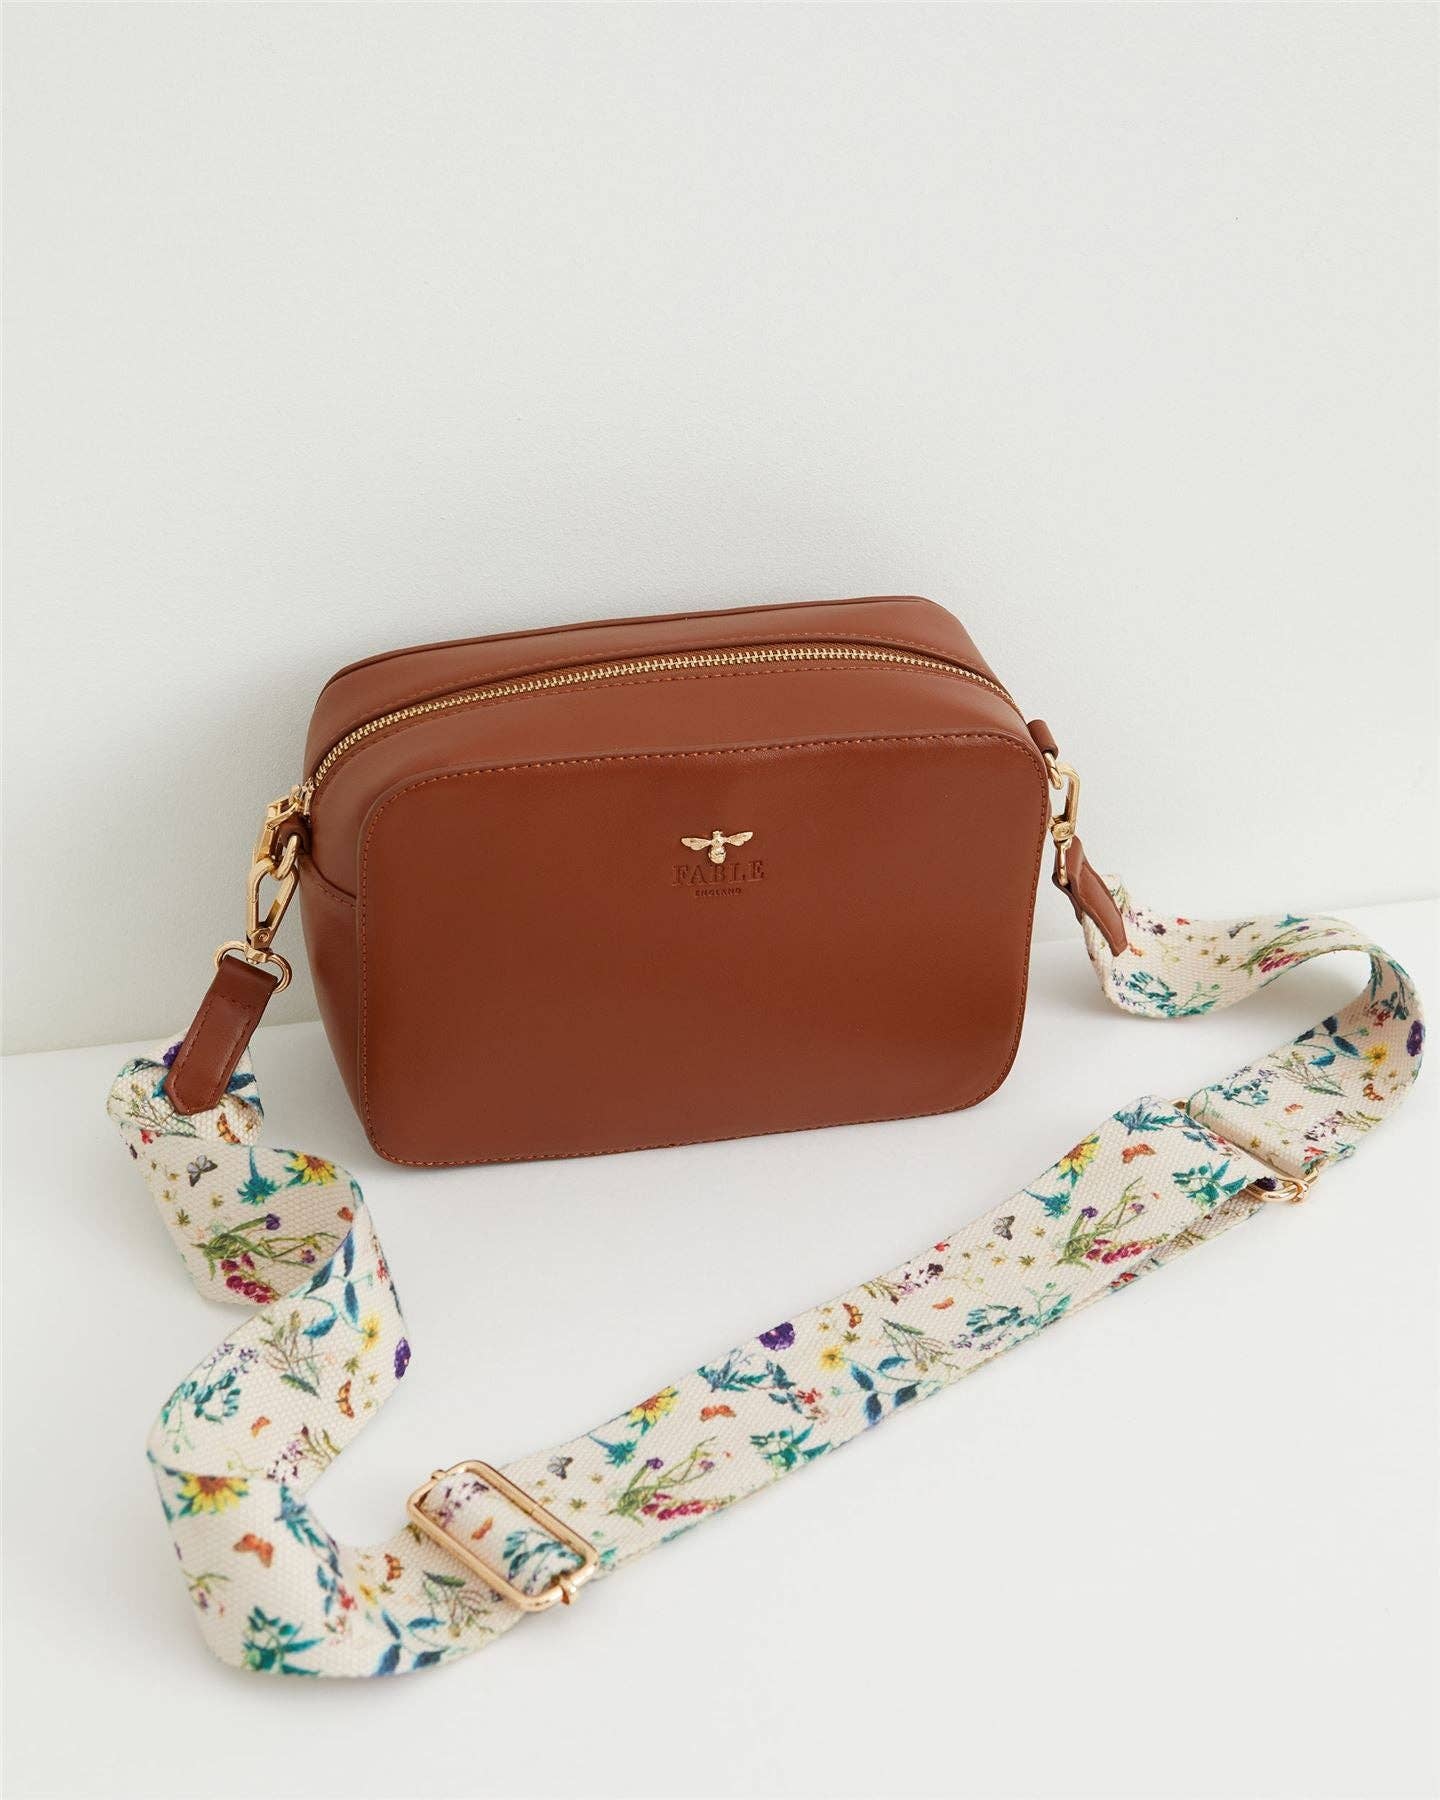 Fable England Camera Bag with Printed Strap in Tan. Fable England where to buy. Enniskillen Shopping Center. 